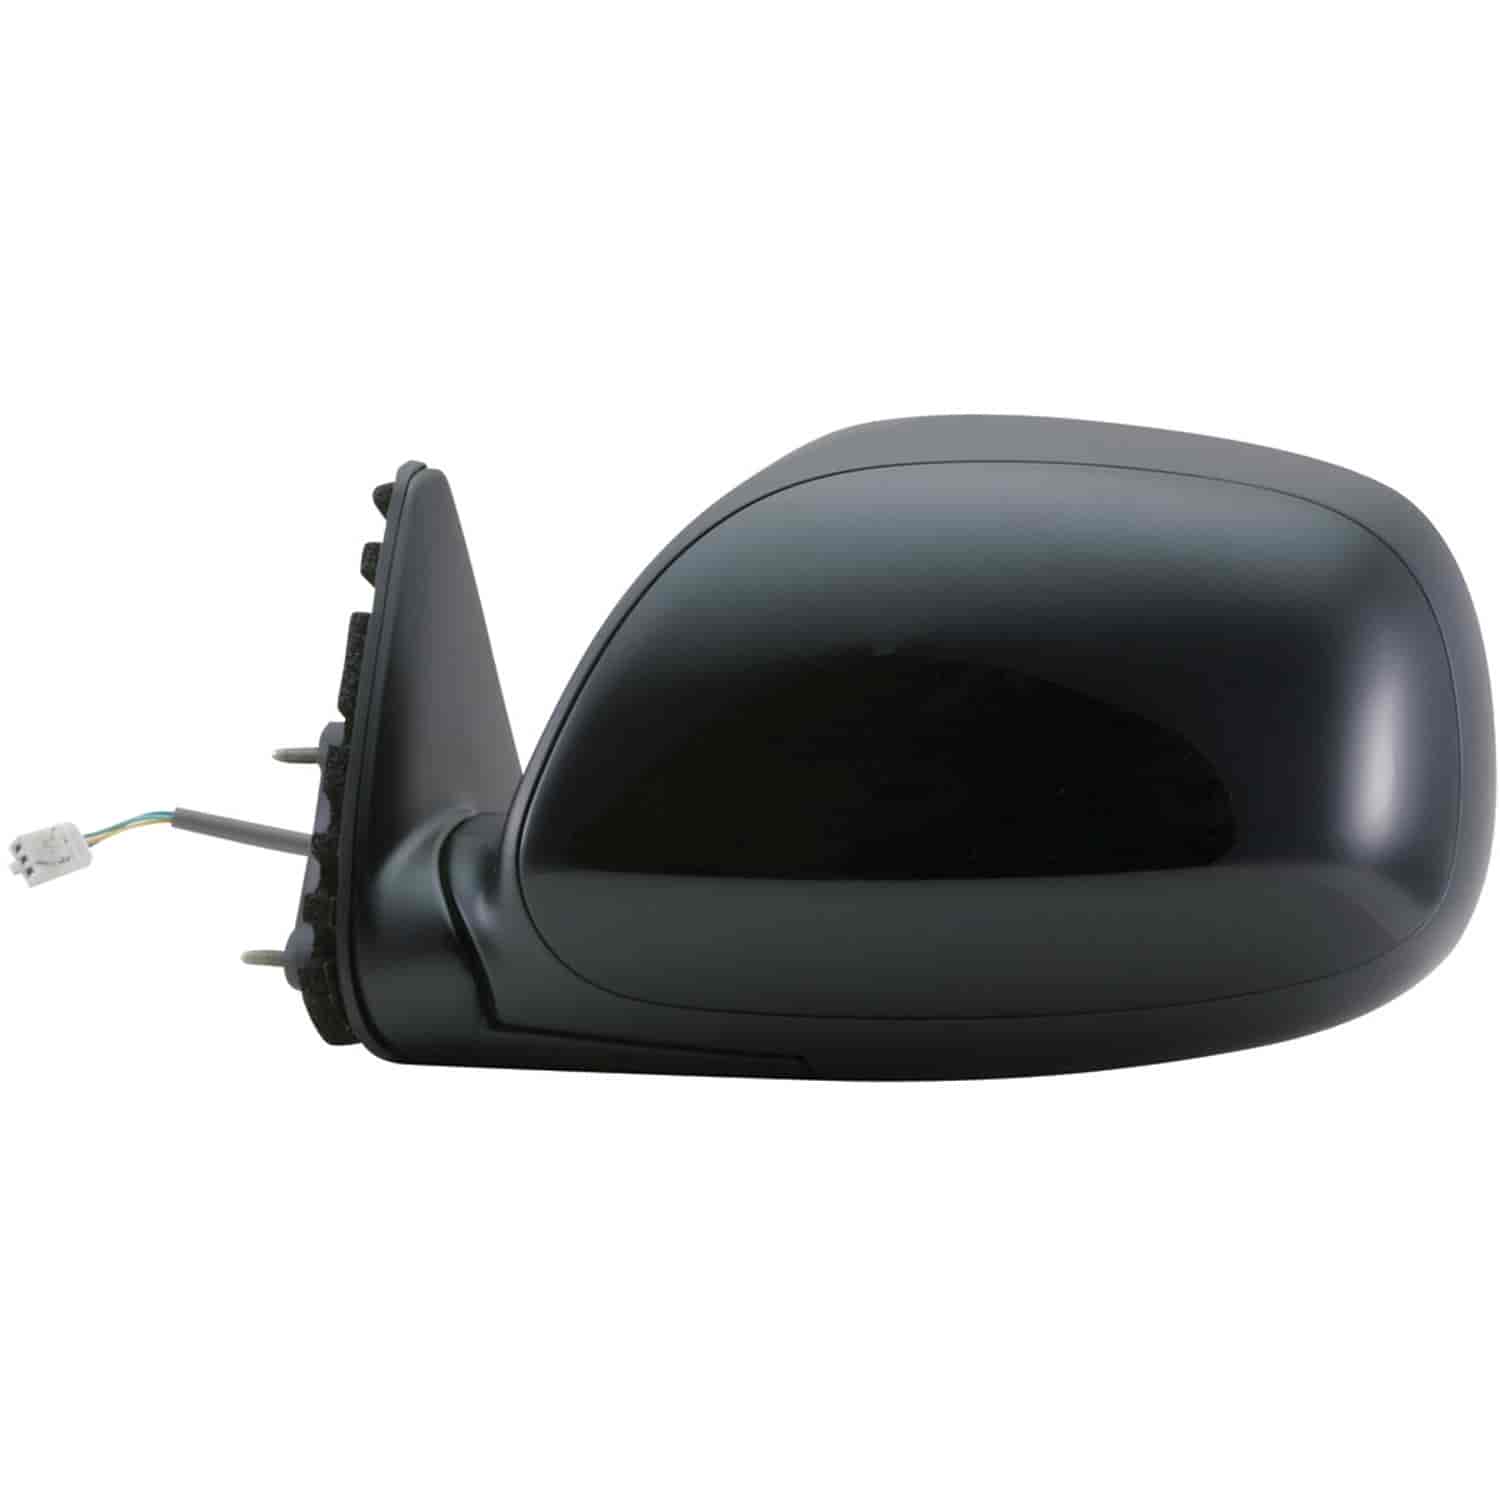 OEM Style Replacement mirror for 00-04 Toyota Tundra Pick-Up driver side mirror tested to fit and fu